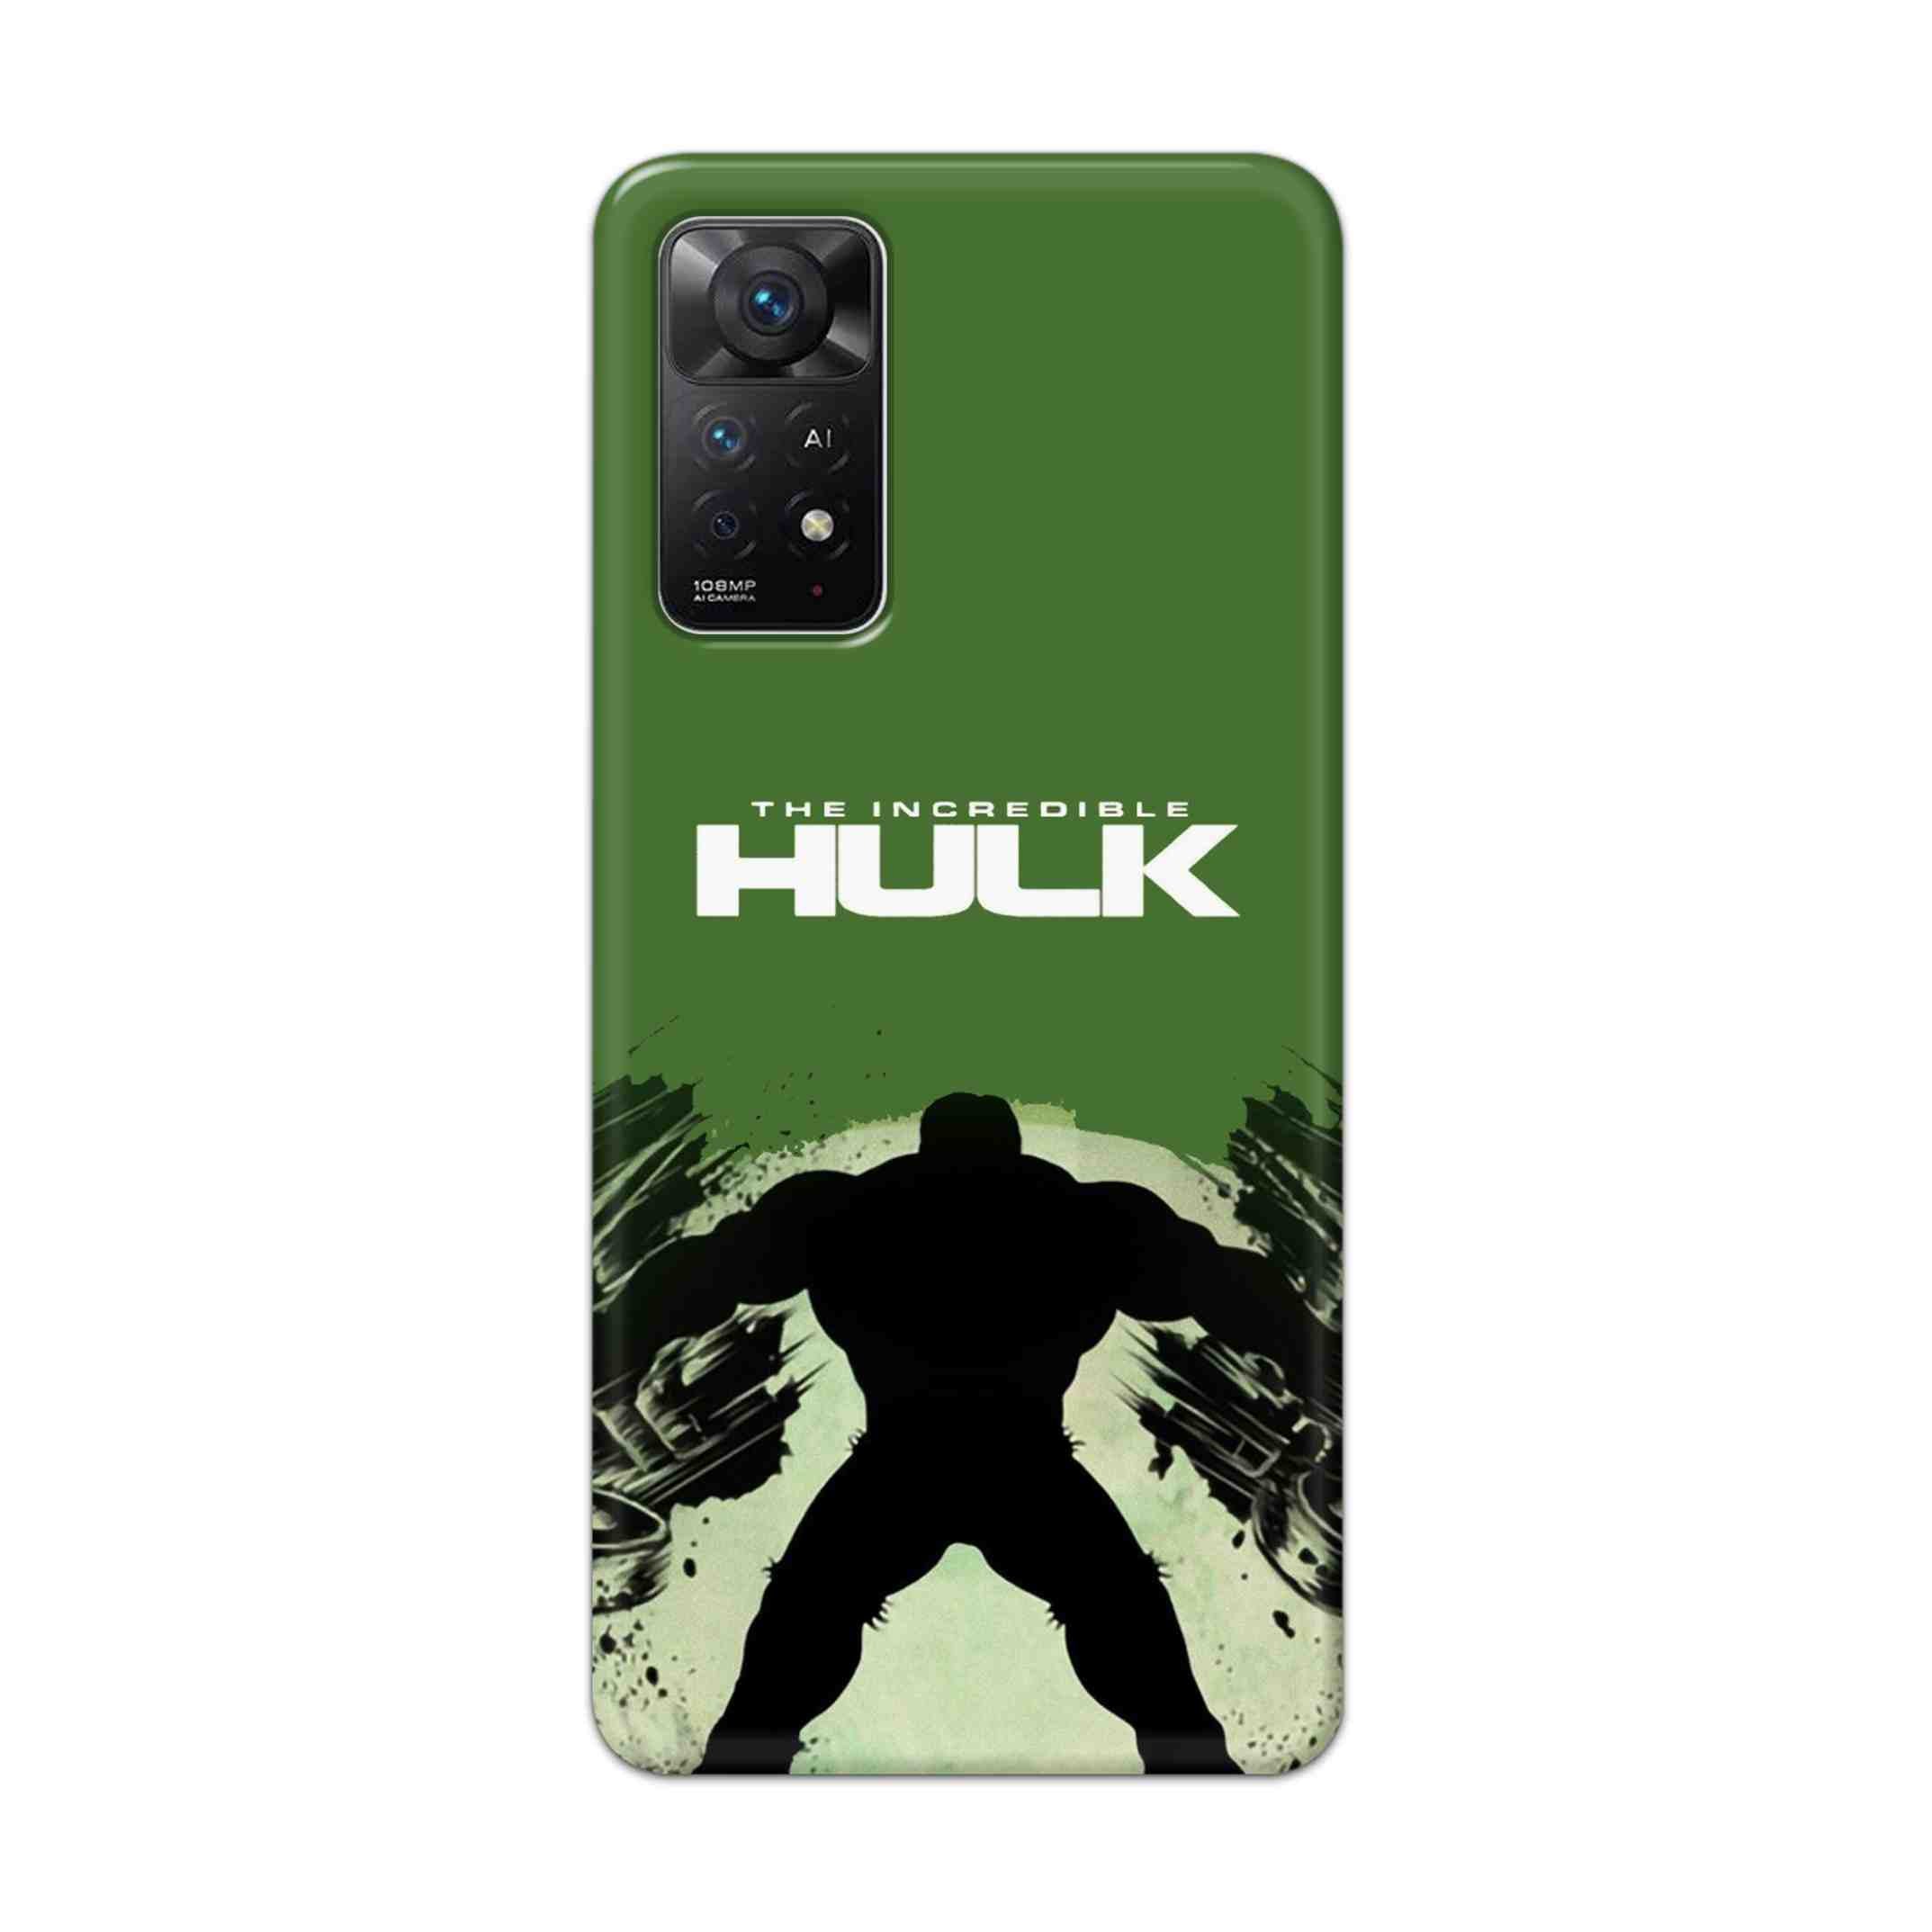 Buy Hulk Hard Back Mobile Phone Case Cover For Redmi Note 11 Pro Plus Online